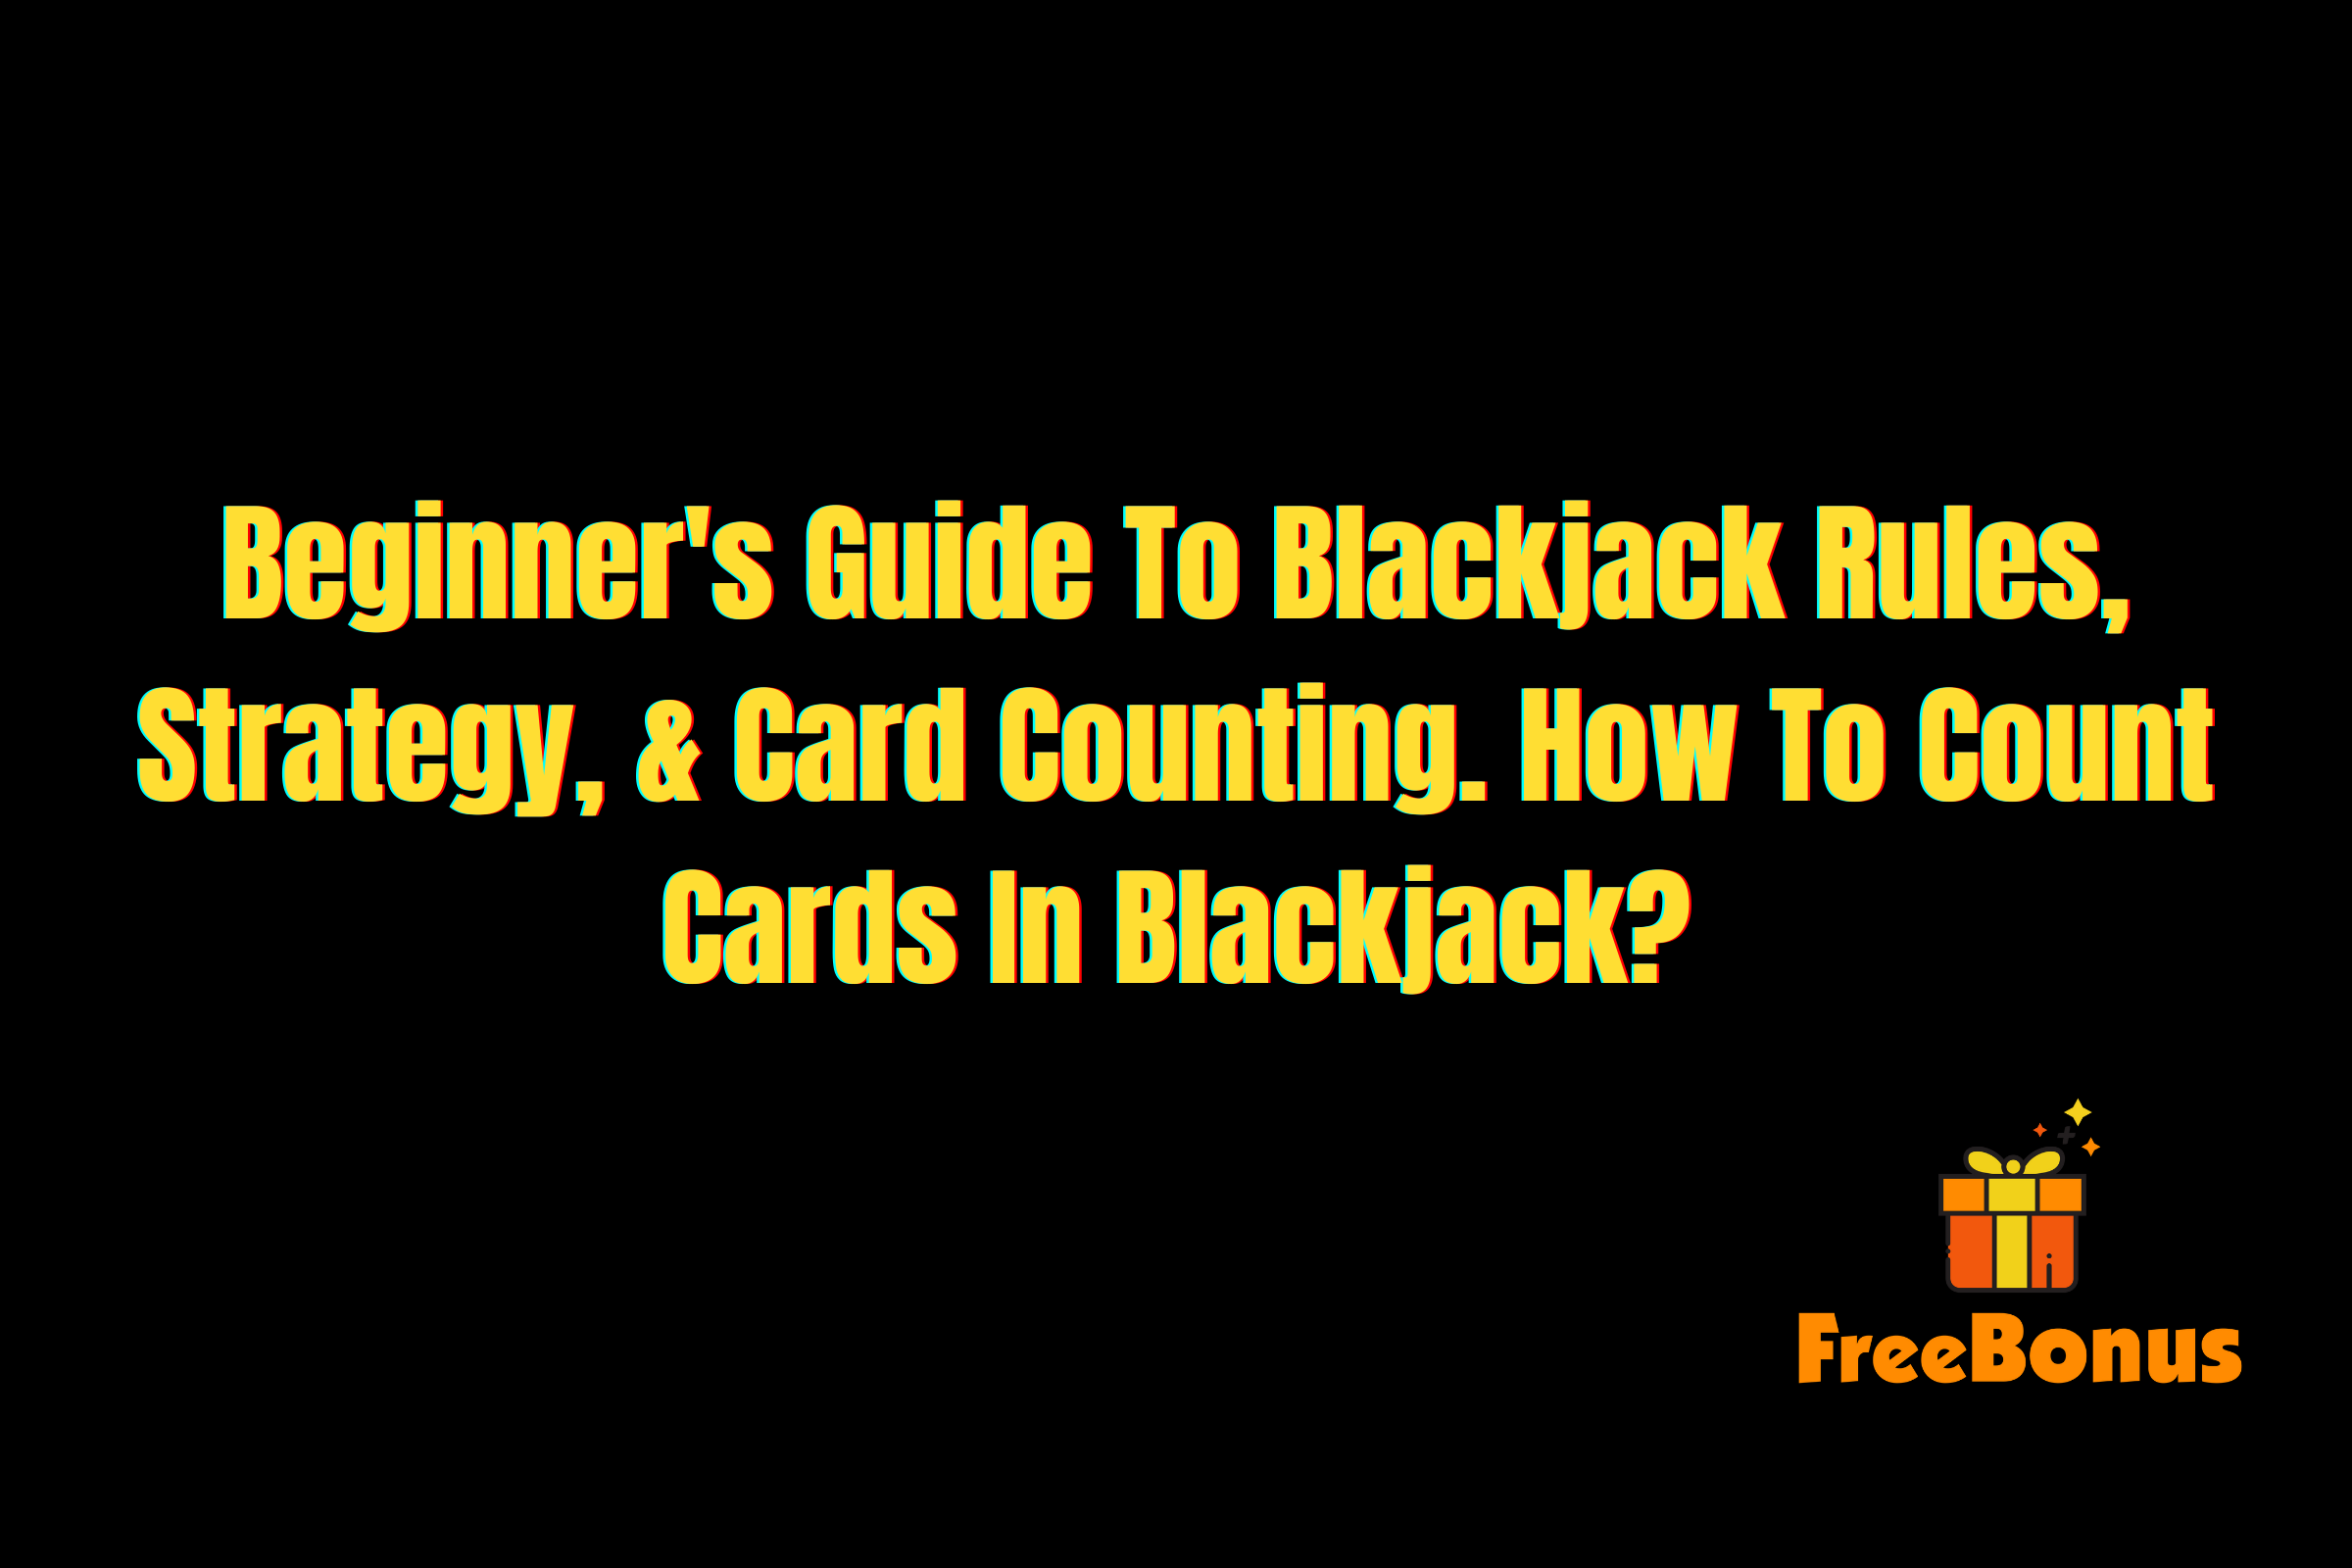 Beginner's Guide To Blackjack Rules, Strategy, & Card Counting. How To Count Cards In Blackjack?